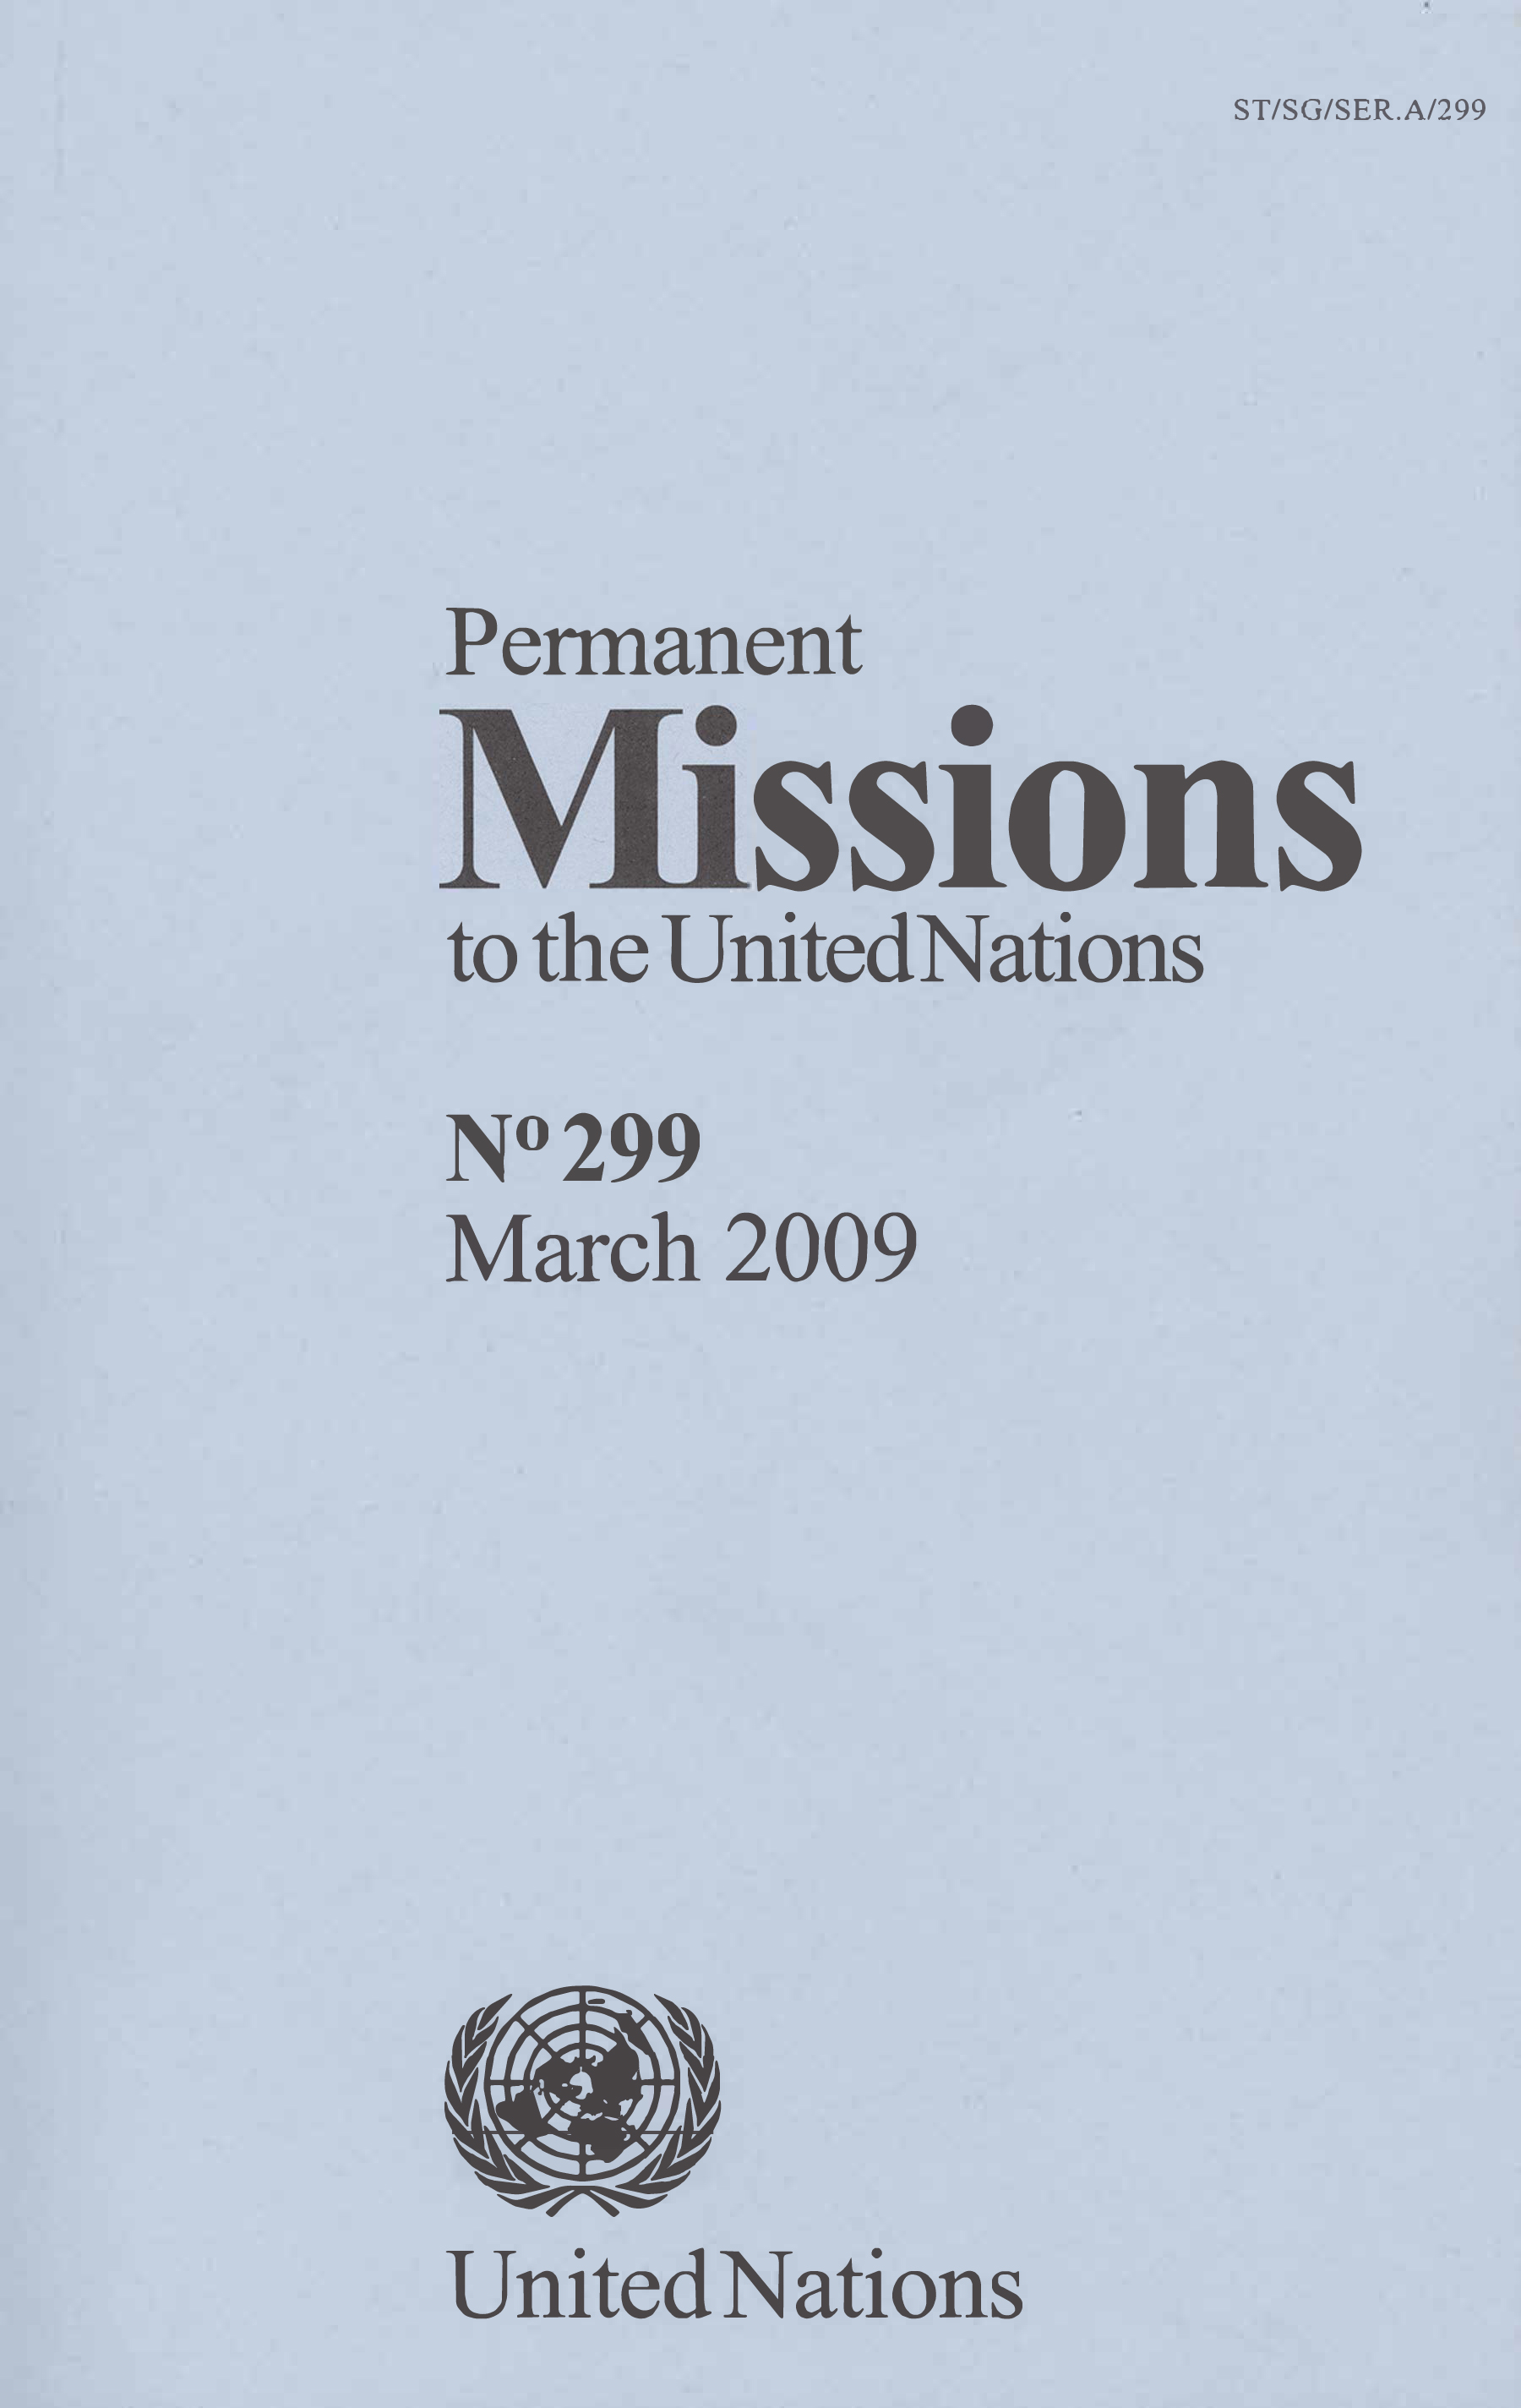 image of Permanent Missions to the United Nations No.299